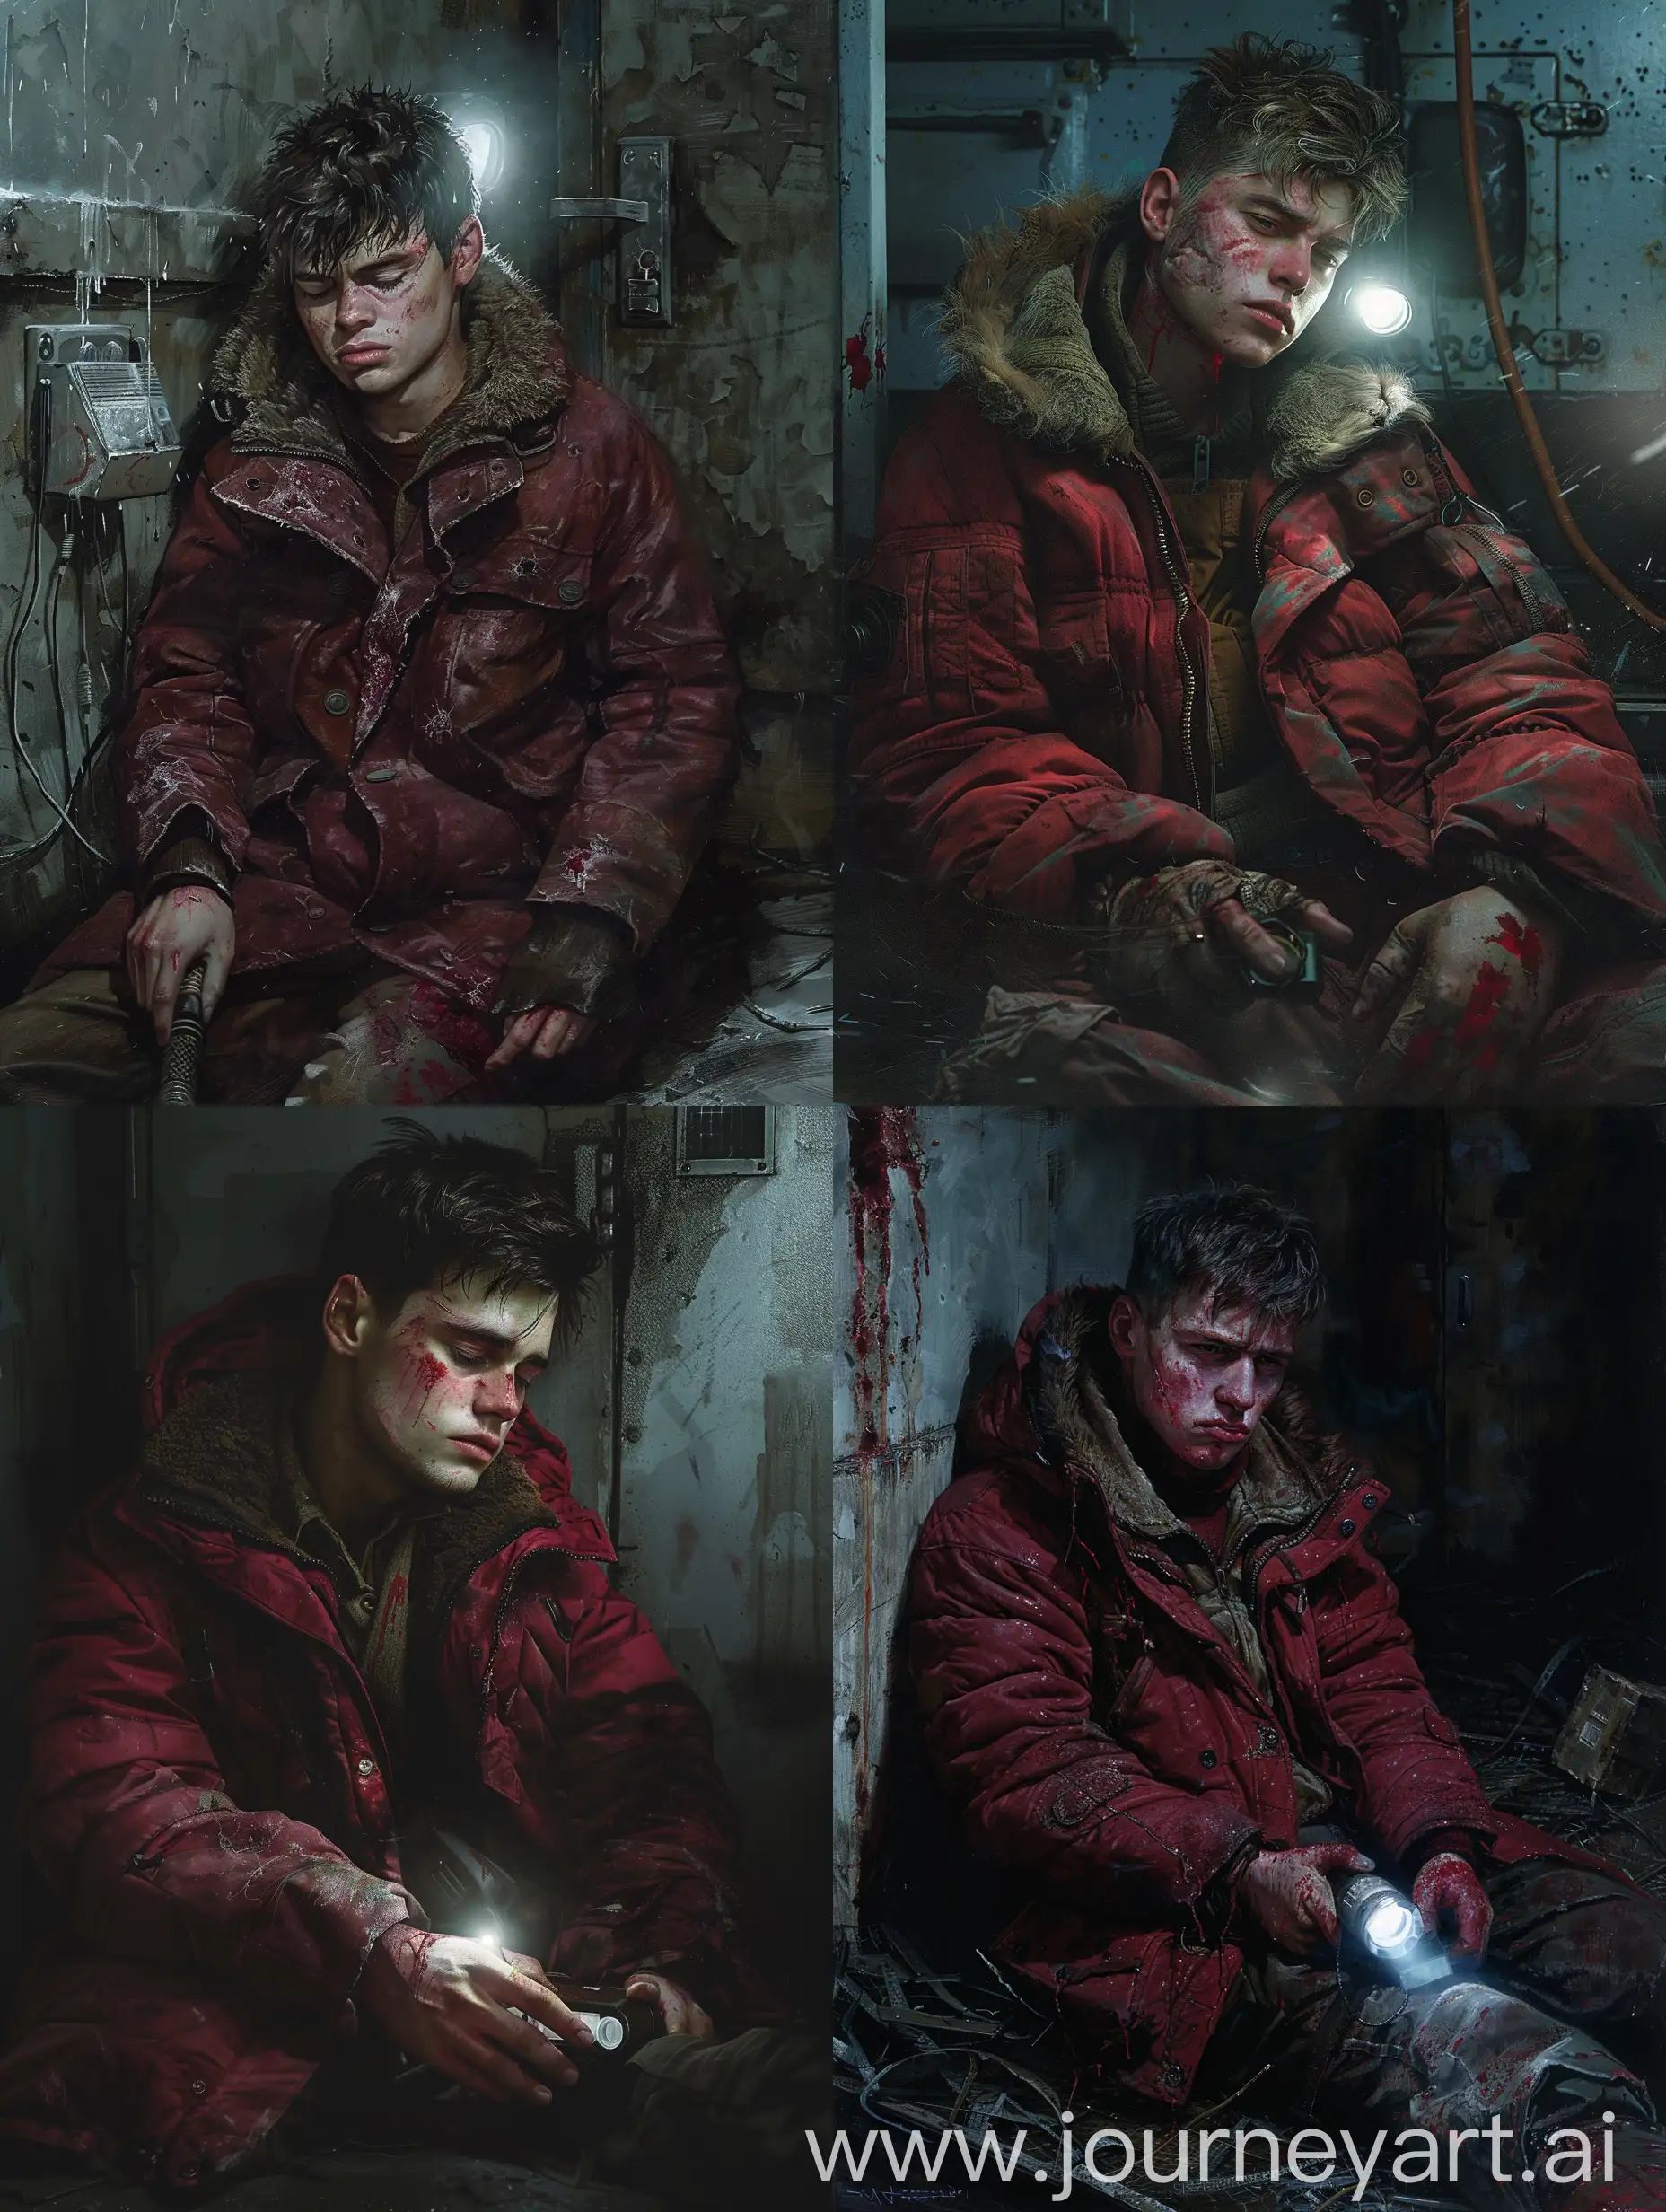 1980s-Bunker-Scene-Young-Man-in-Tattered-Red-Parka-Reflecting-in-Dim-Light